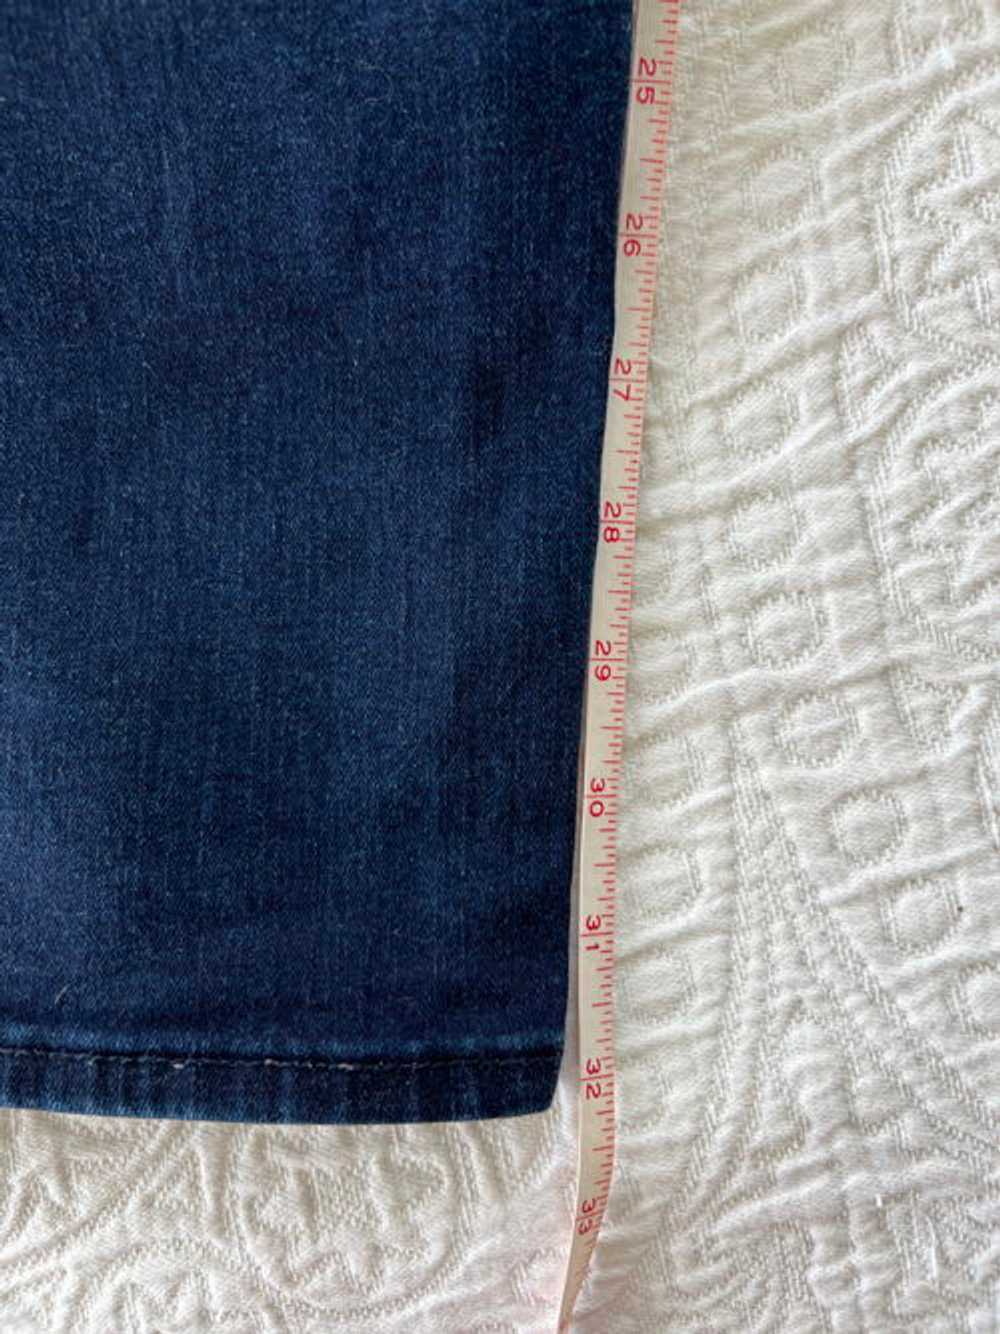 Tall Size American Eagle Skinny Jeans, 14 Extra L… - image 6